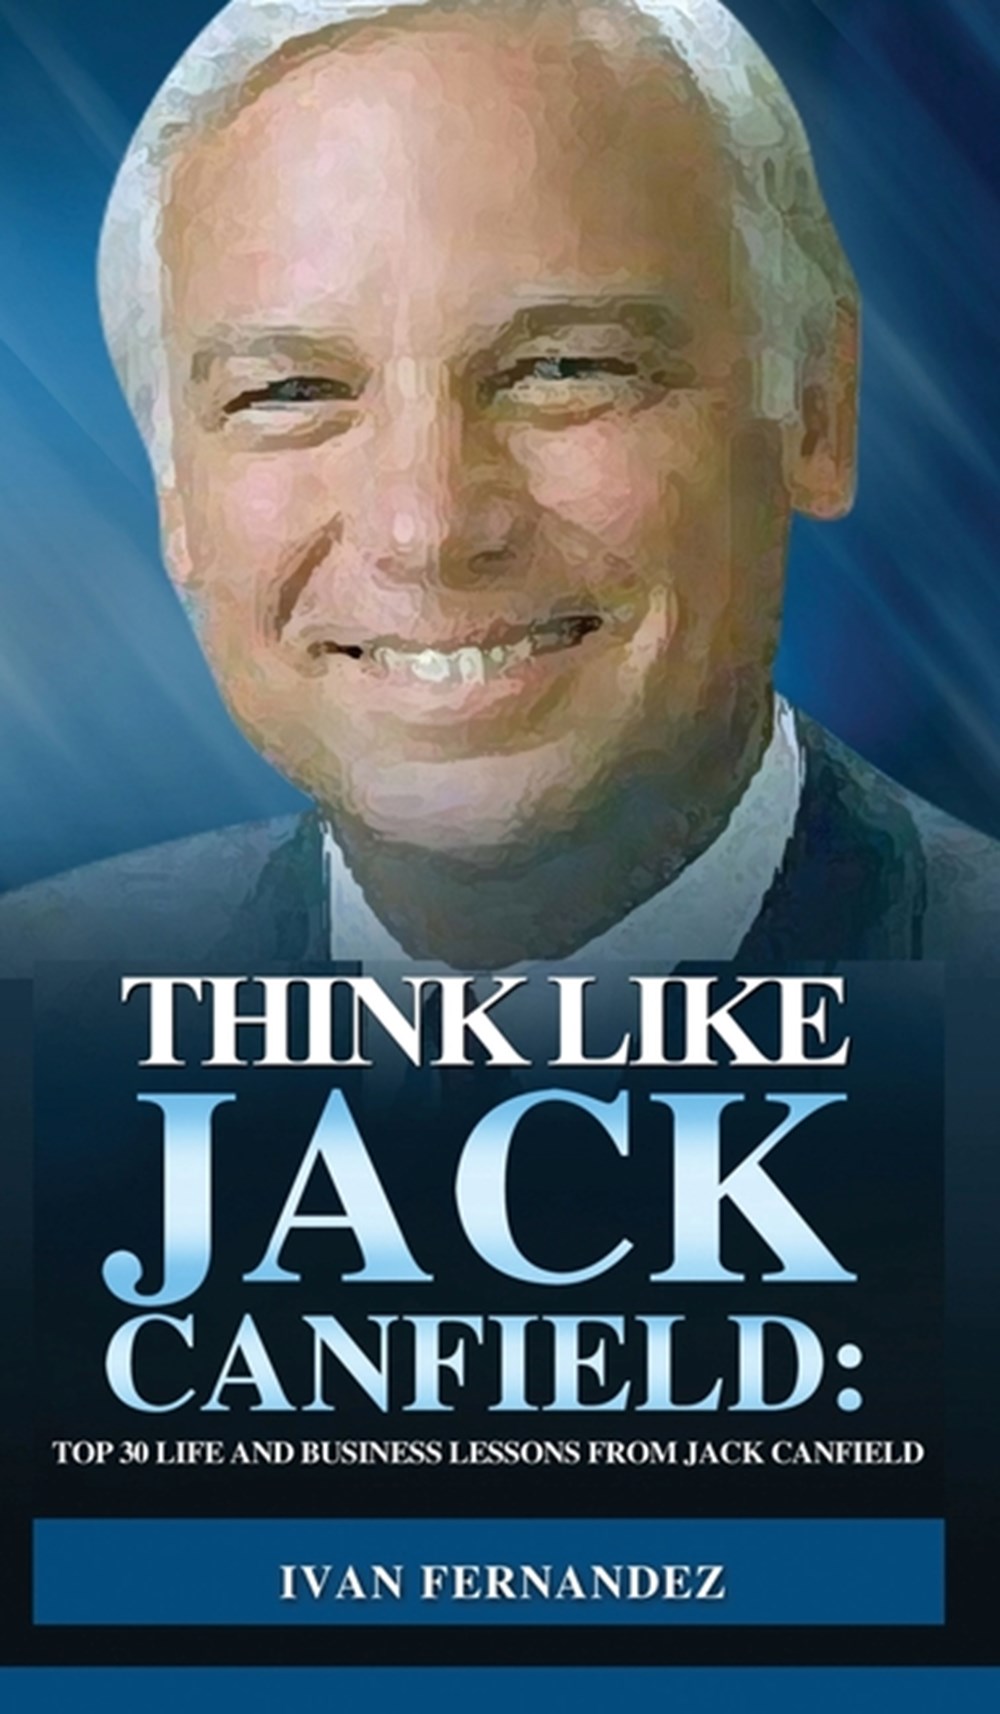 Think Like Jack Canfield Top 30 Life and Business Lessons from Jack Canfield